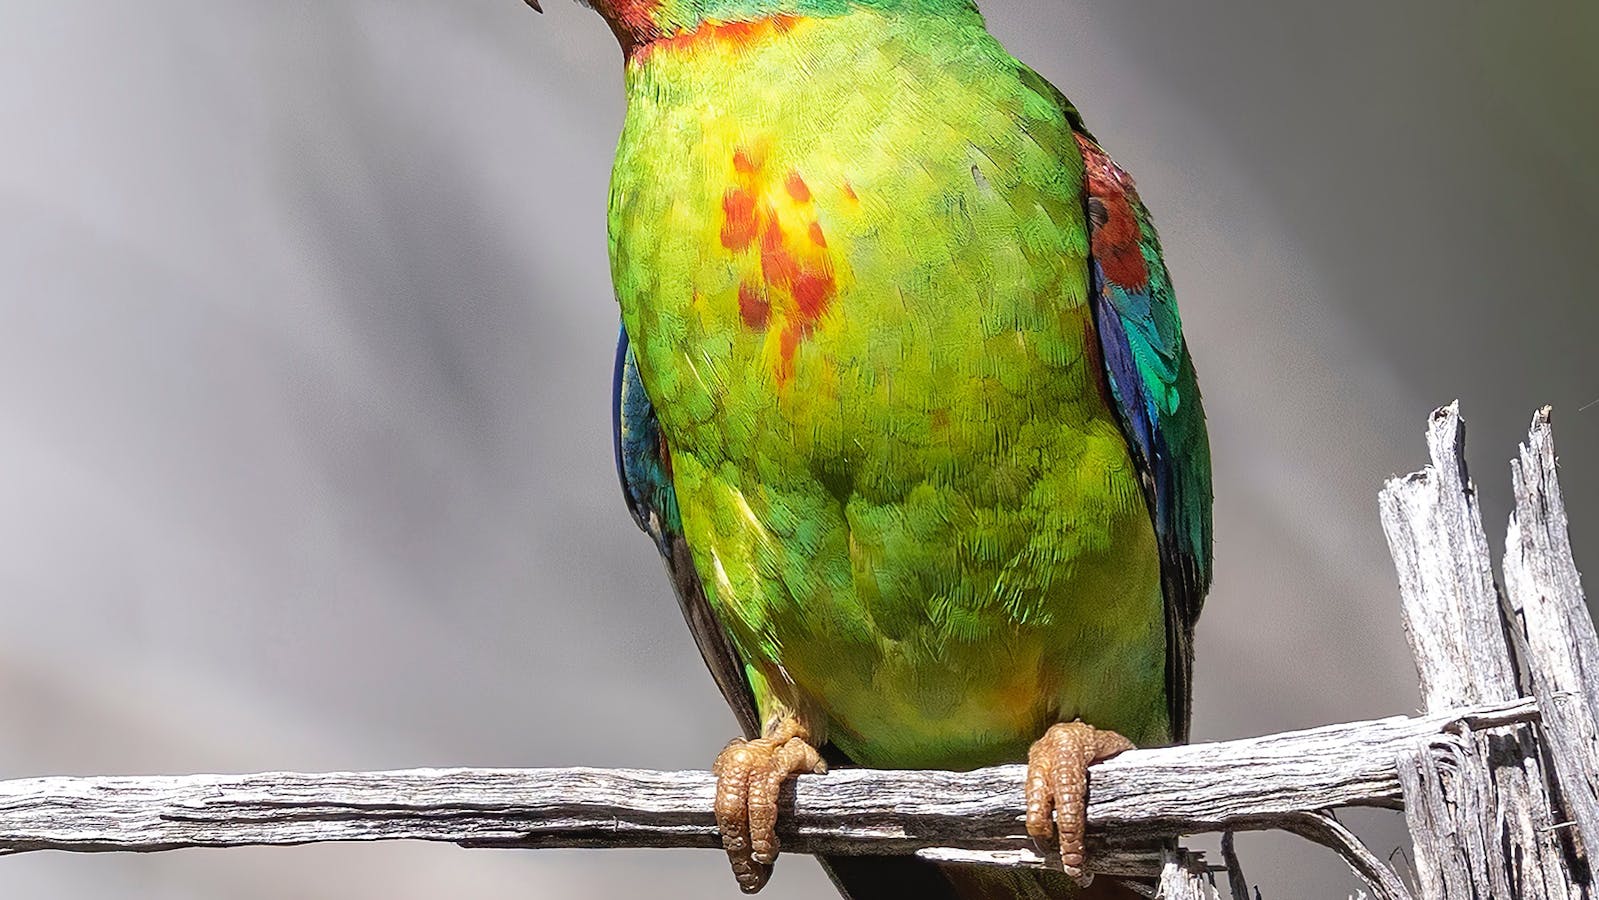 Swift Parrot - an image from a recent exhibition